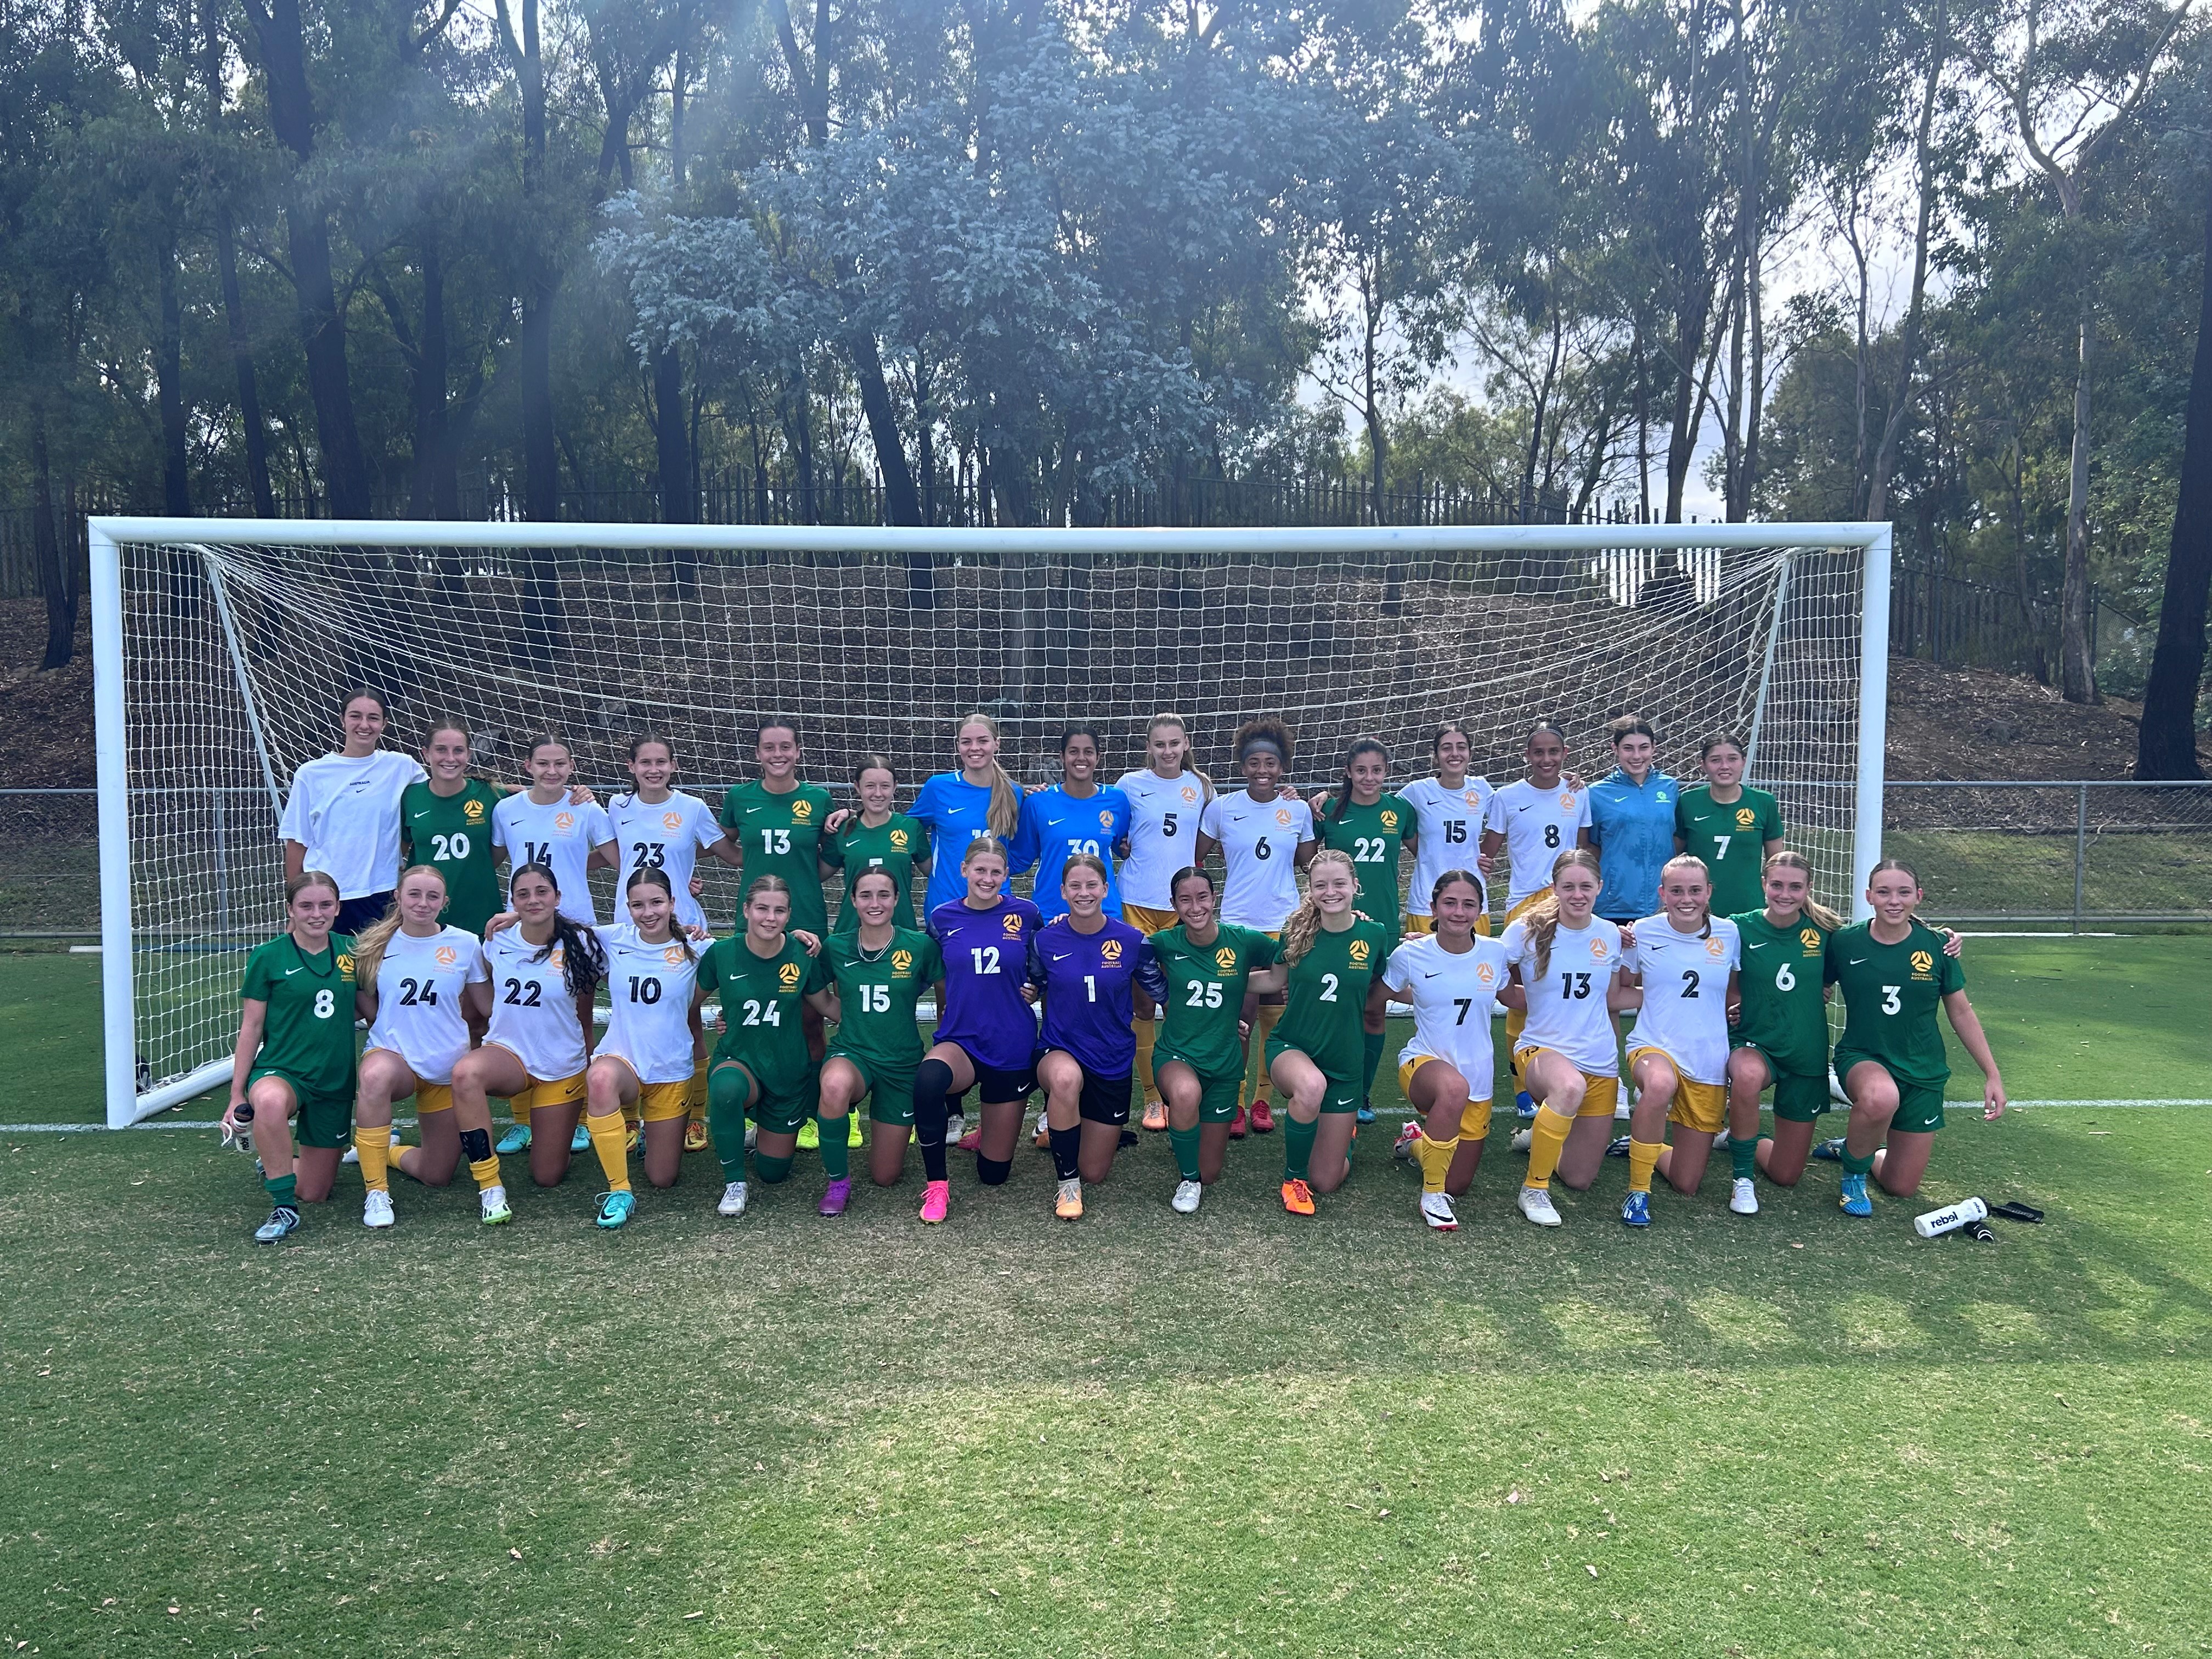 A squad photo of the 30 players attending the February Junior Matildas training camp